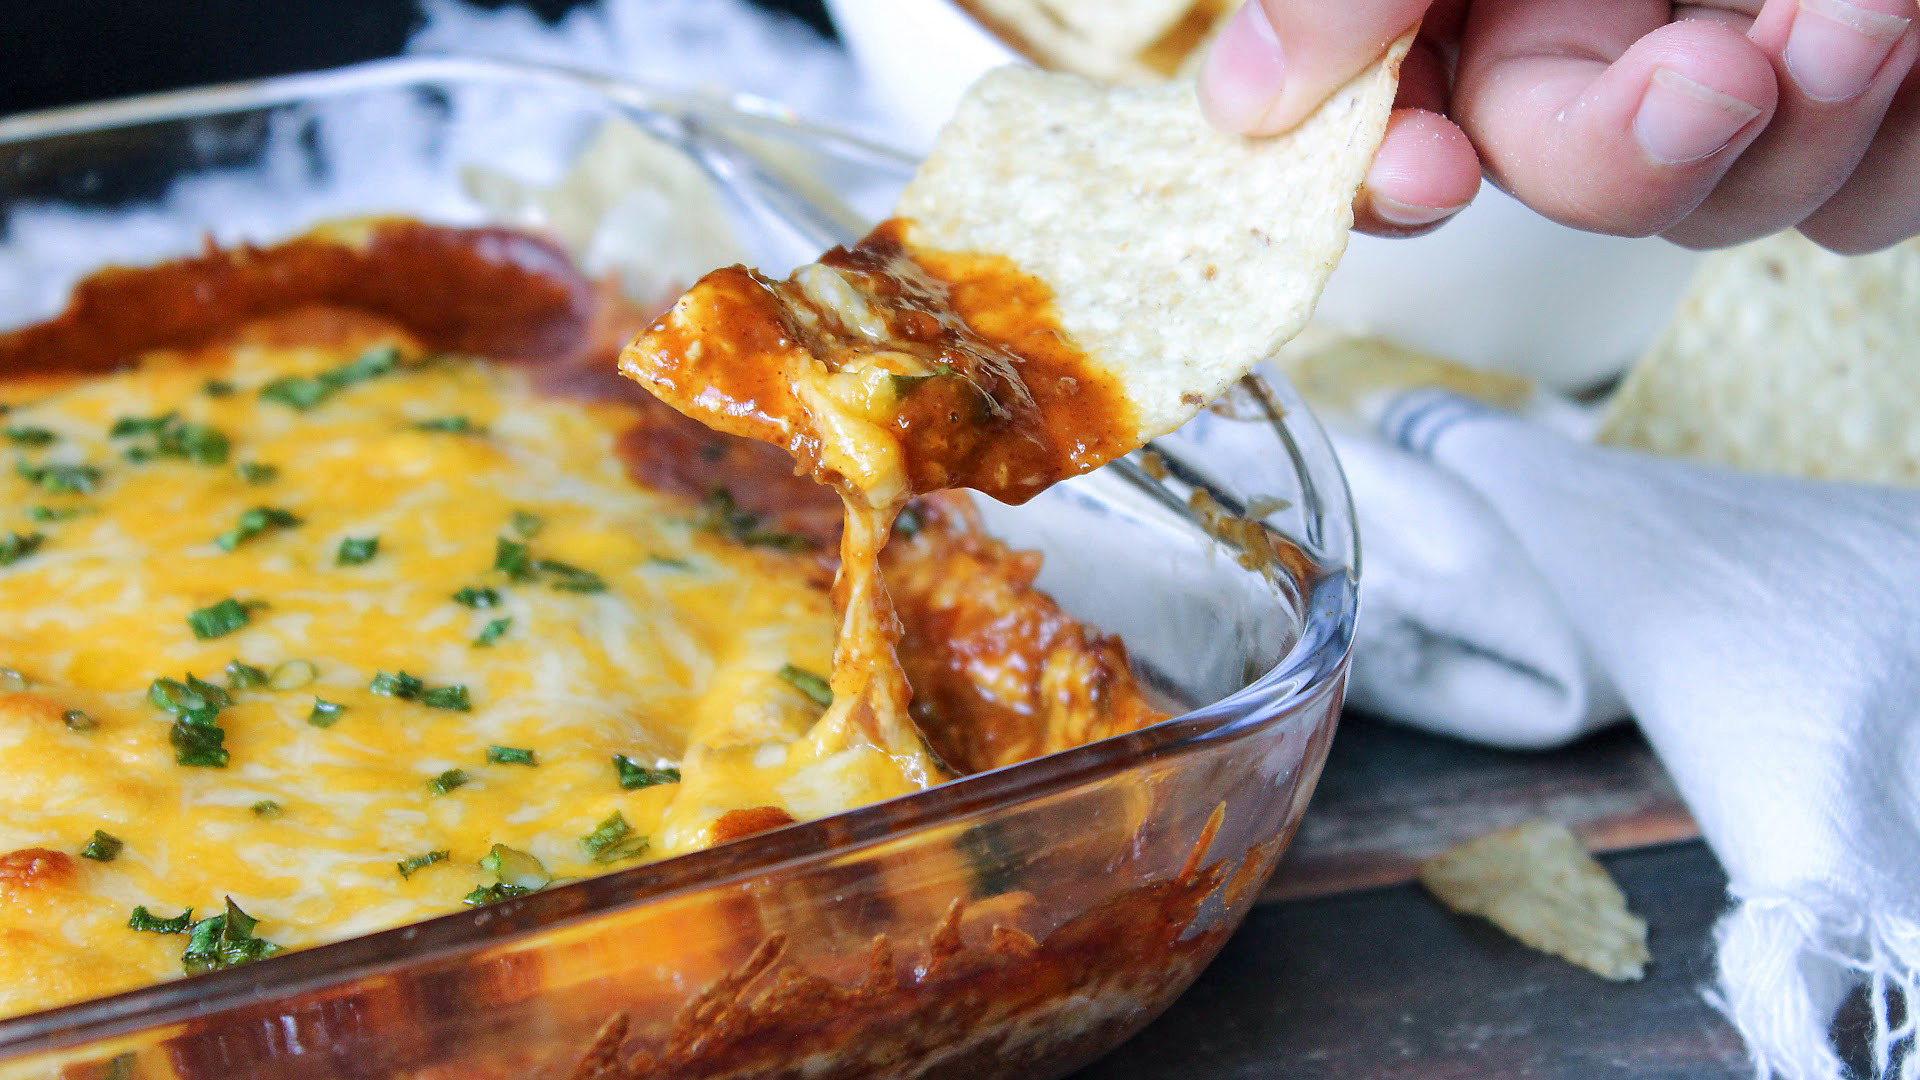 There Are So Many Layers Of Flavor In This Chili Cheese Dip - 5 Layer ...